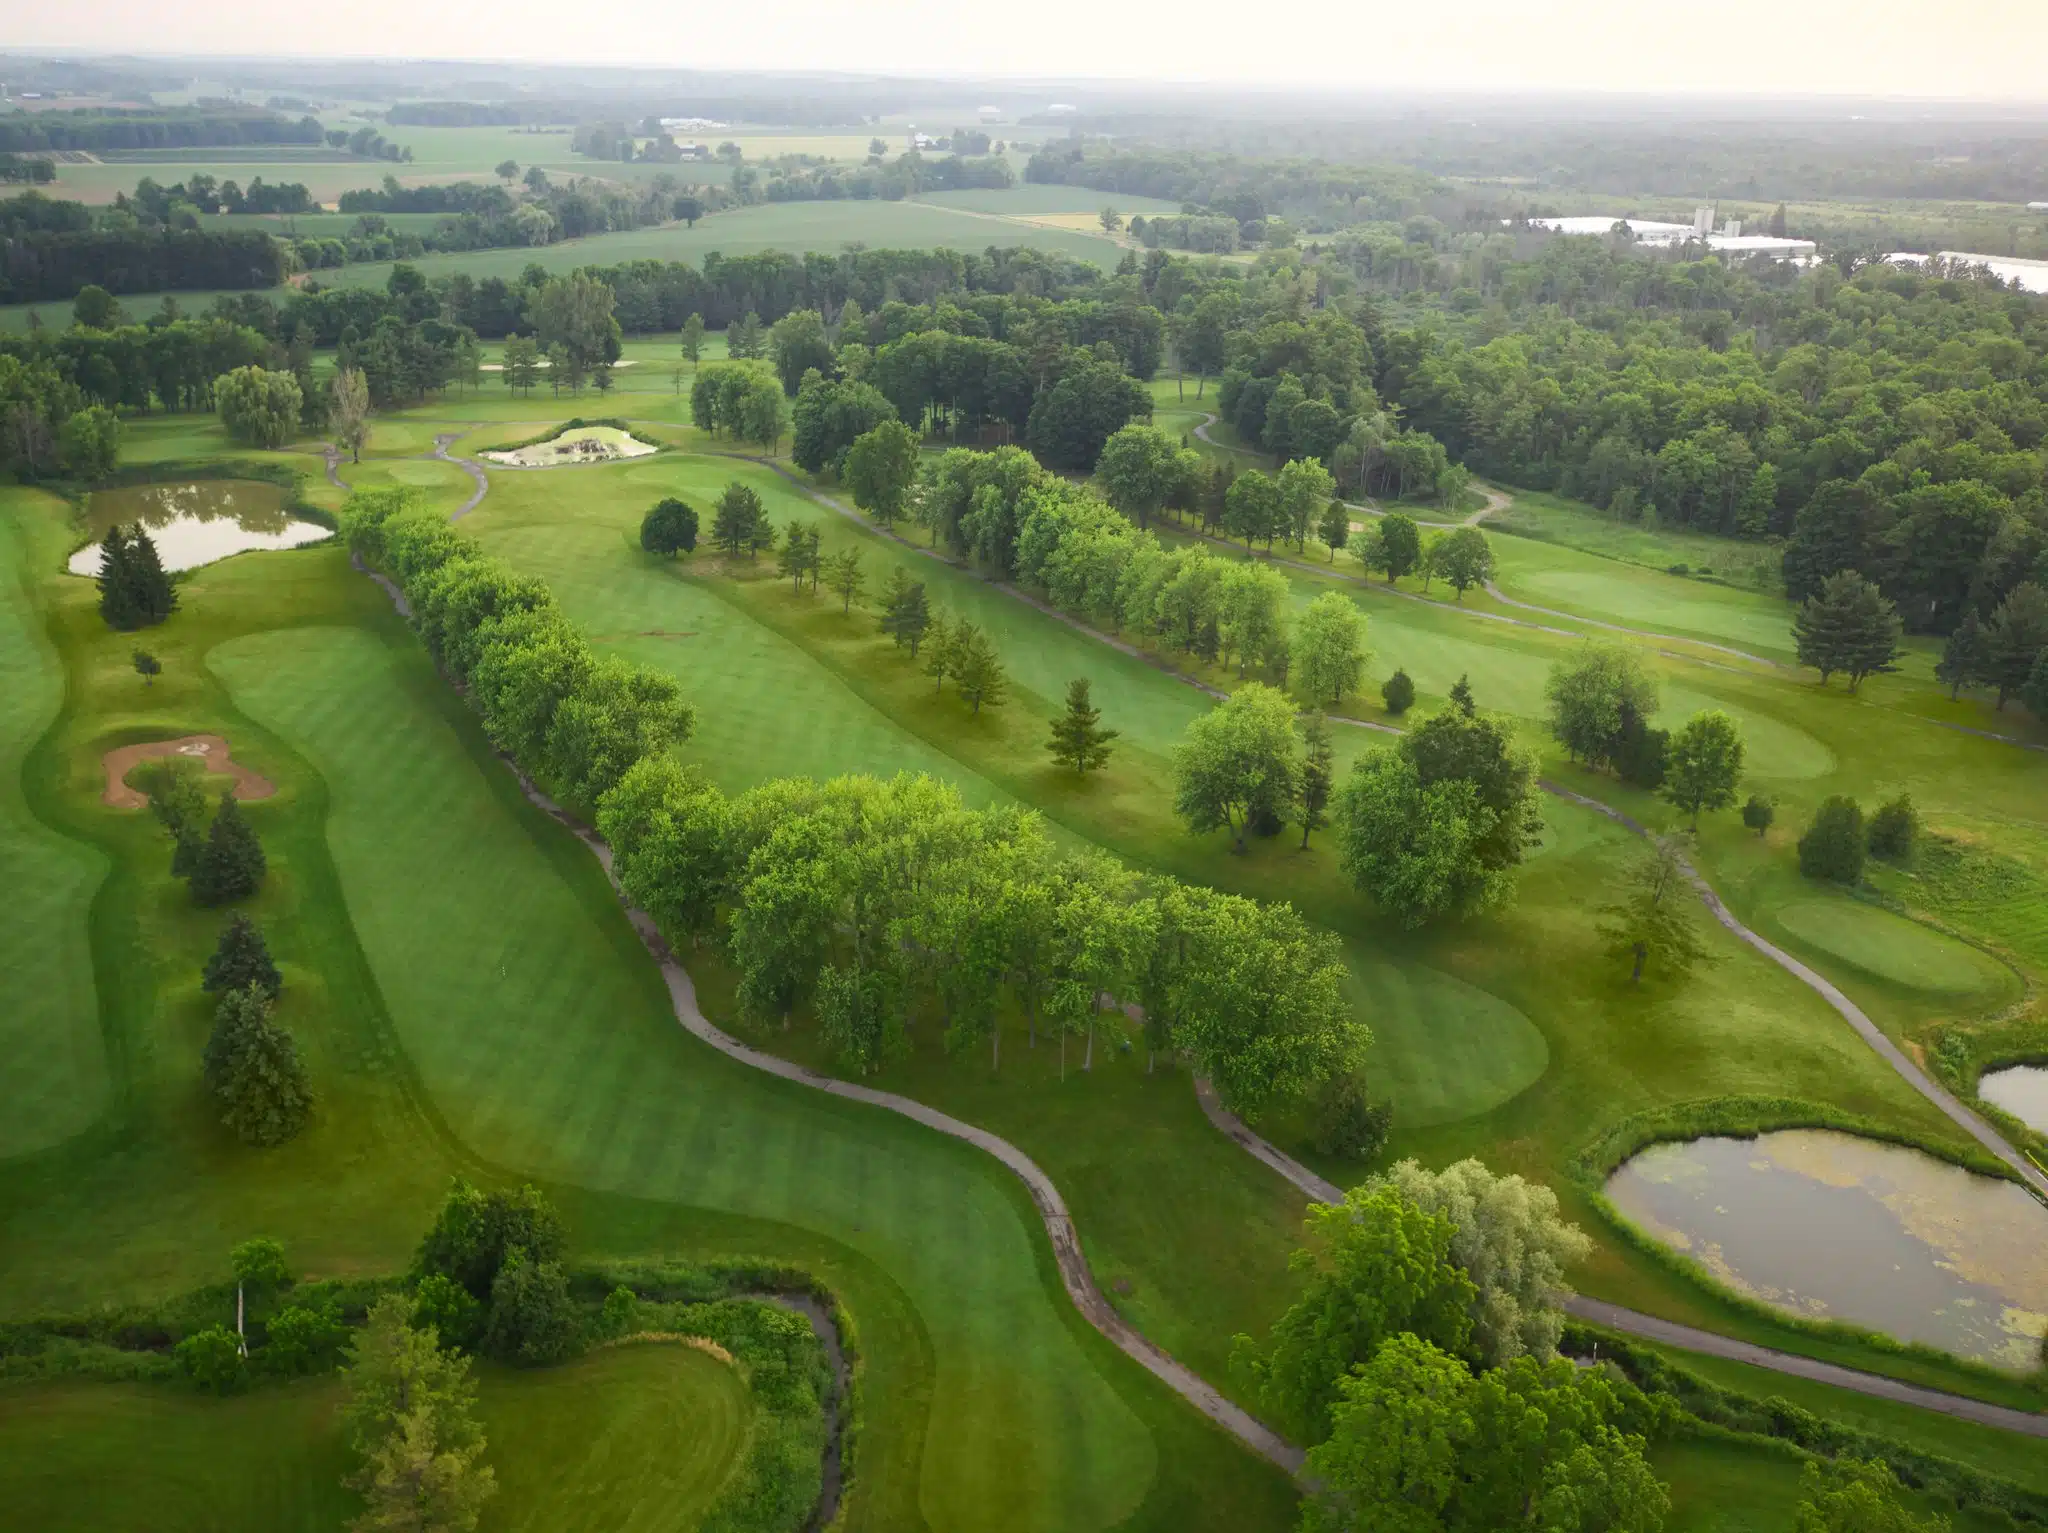 Aerial image providing an overview of a large portion of the golf course.